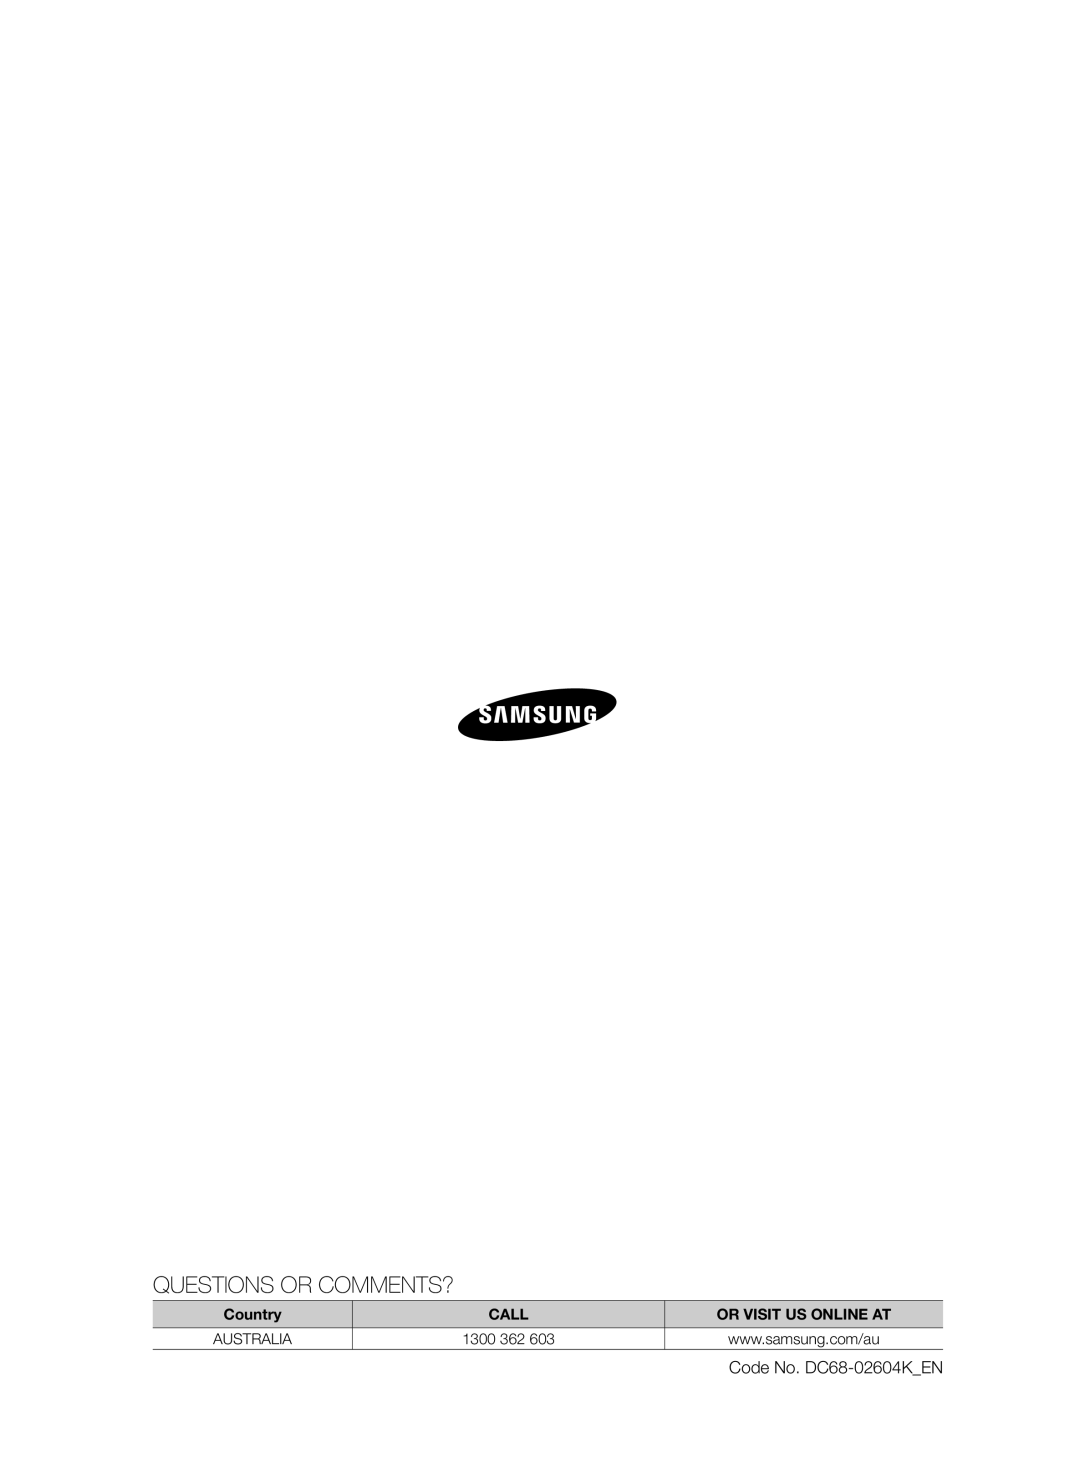 Samsung SW65V9W, SW75V9W user manual Questions Or Comments?, Country, Call, Or Visit Us Online At, 1300 362, Australia 